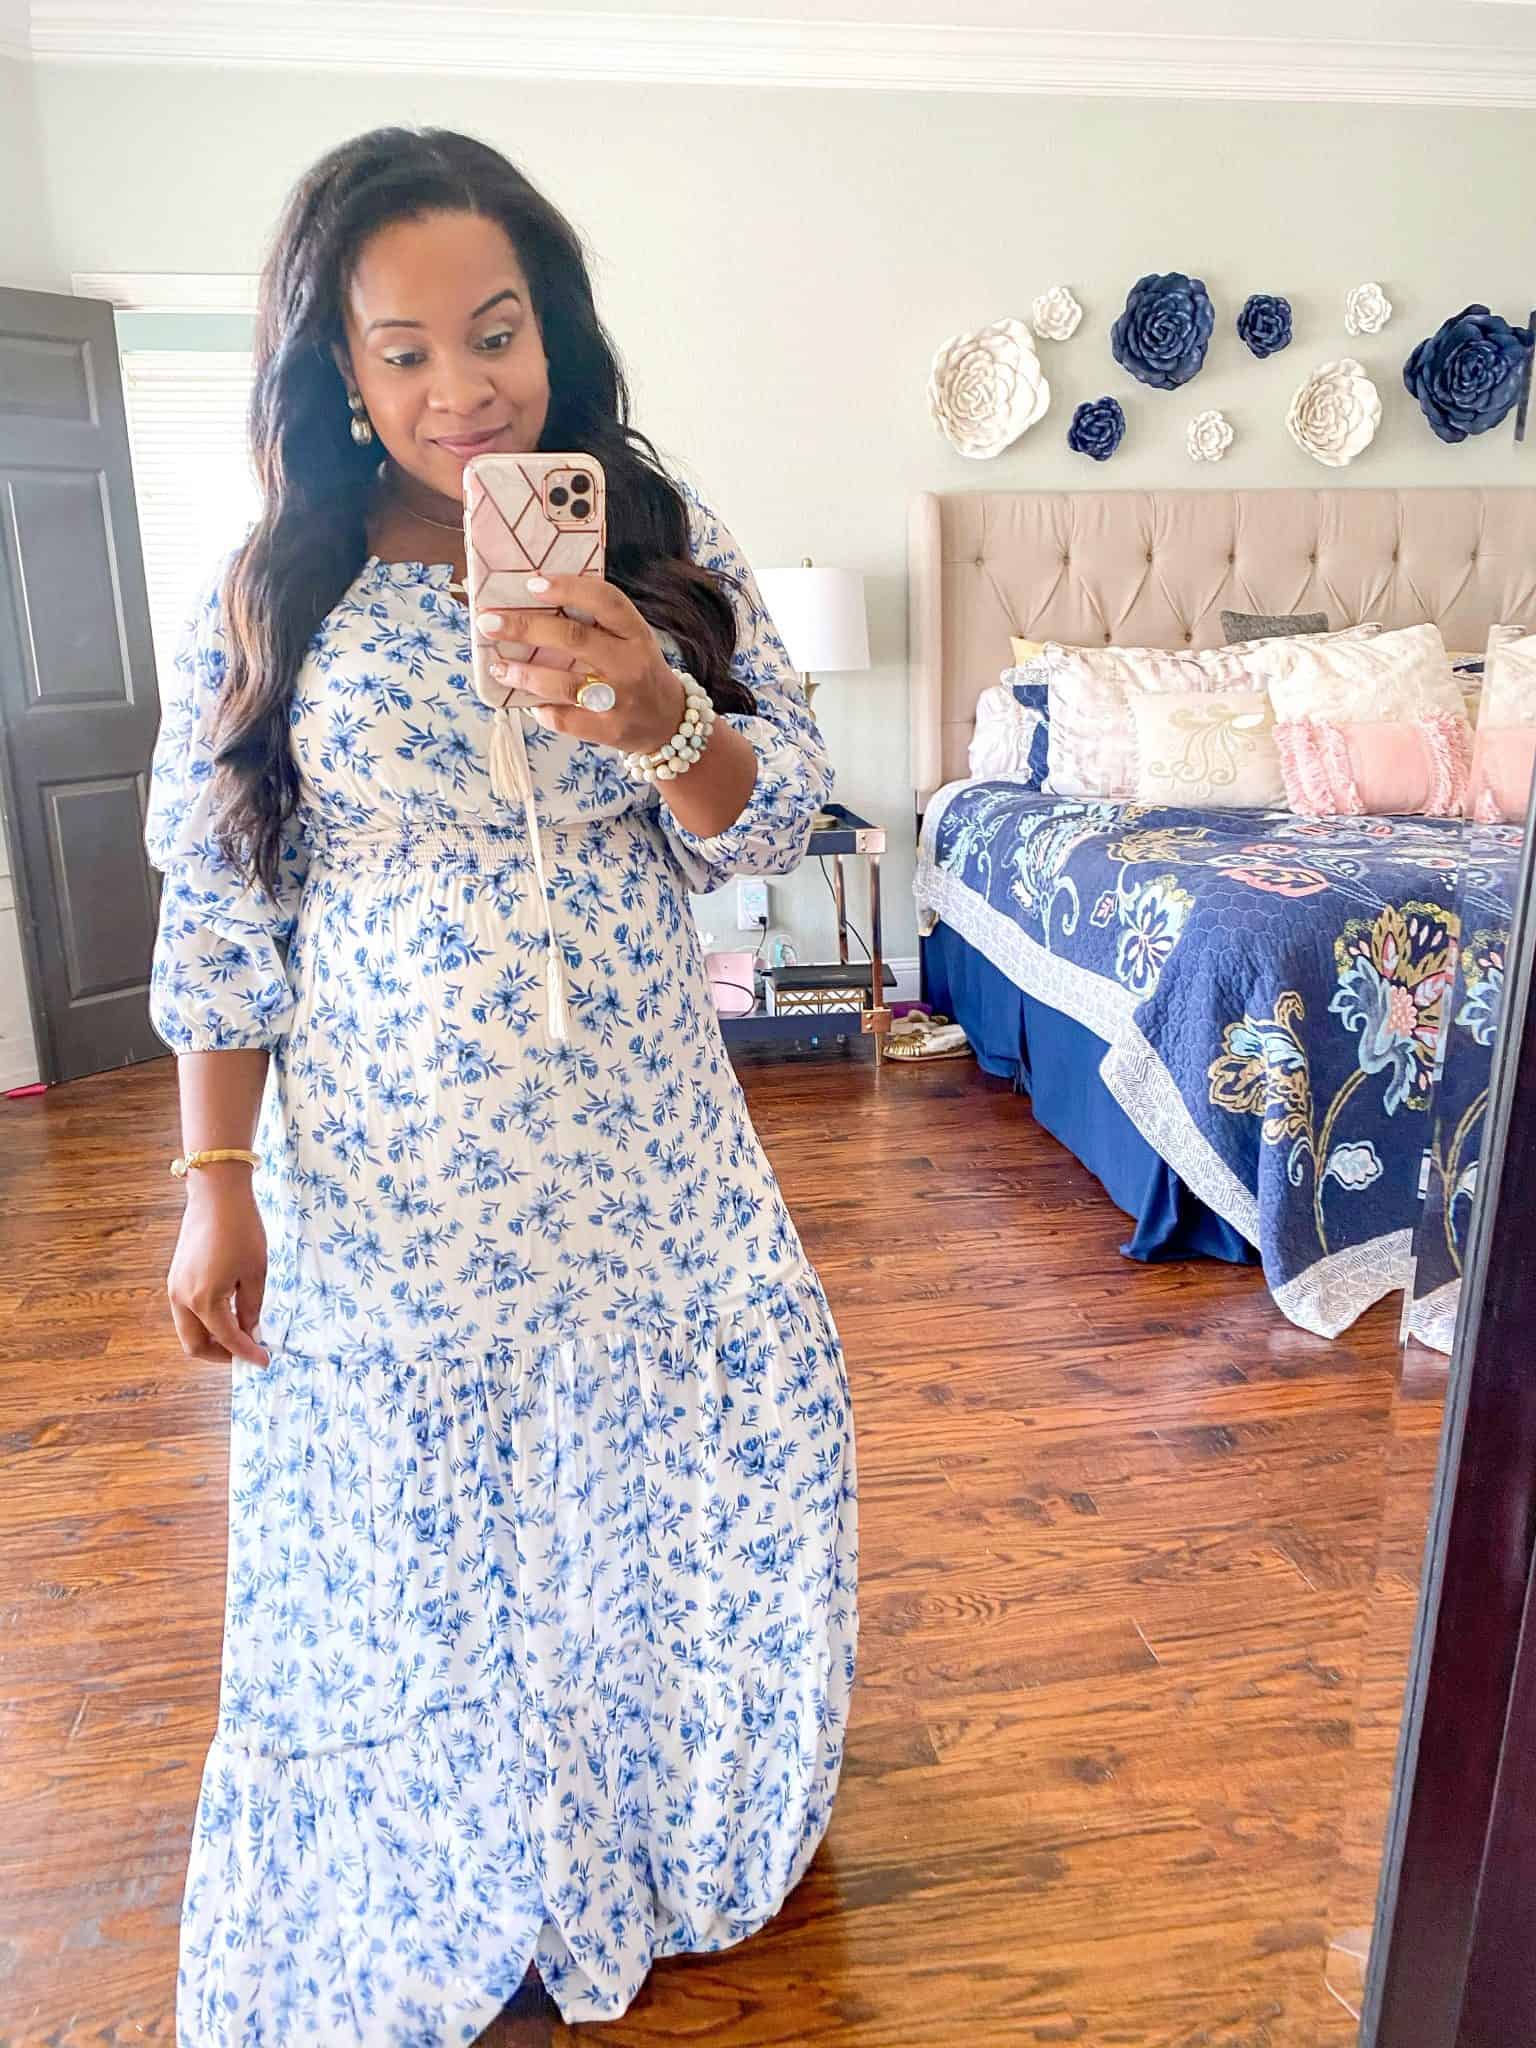 Baby Shower Dress Ideas by popular Dallas fashion blog, Glamorous Versatility: image of a woman wearing a blue and white floral maxi dress. 